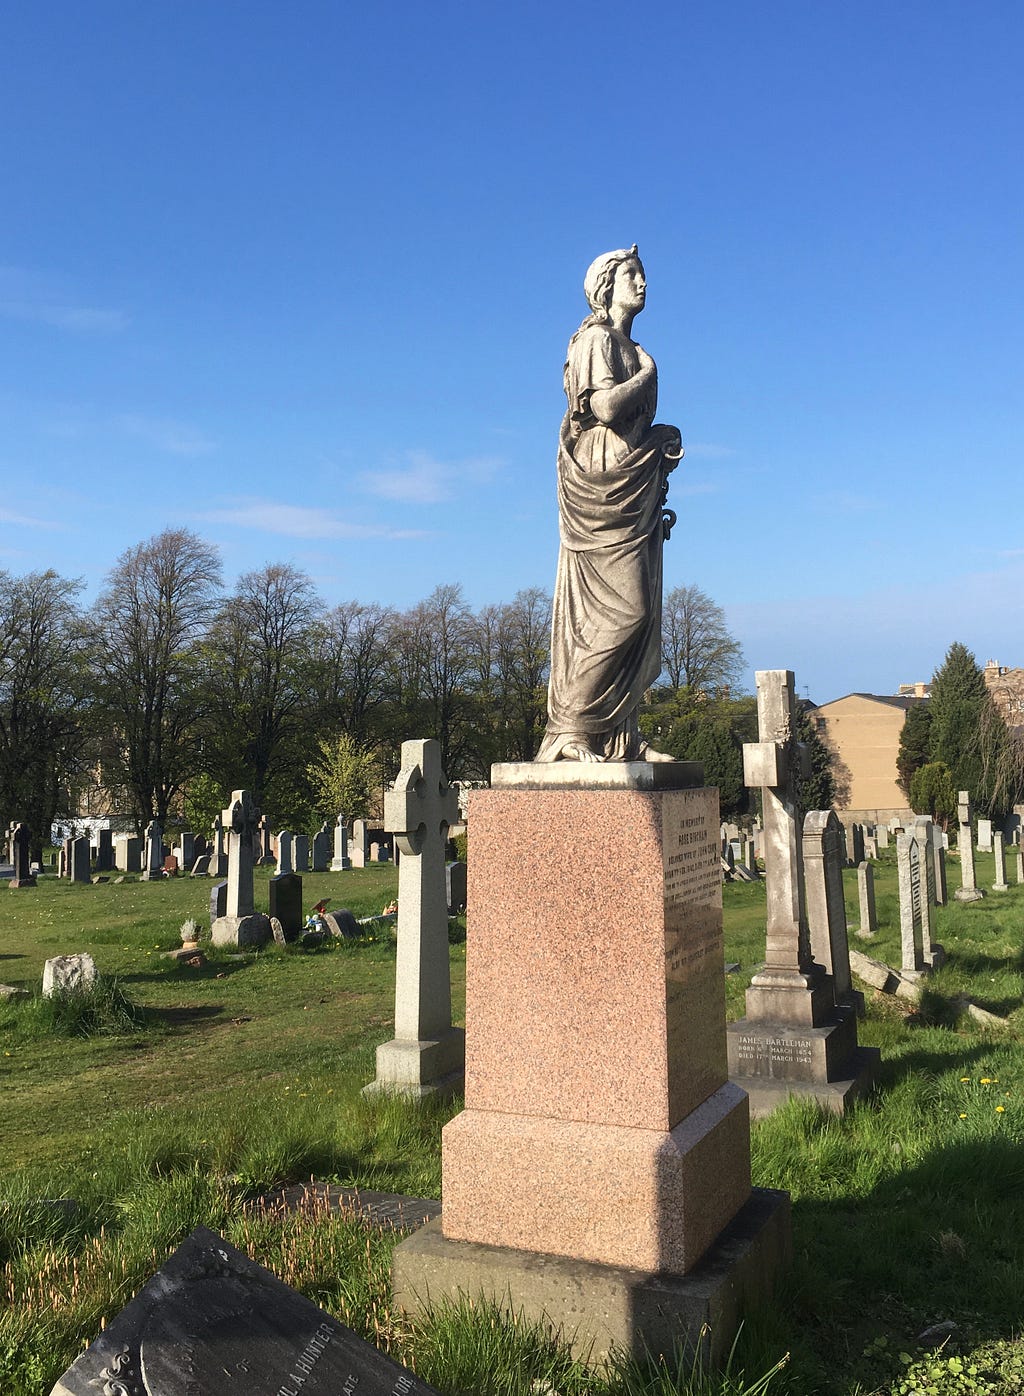 The dirty grey-white statue of a woman in a graveyard from an angle where you can see her face, with blue sky behind